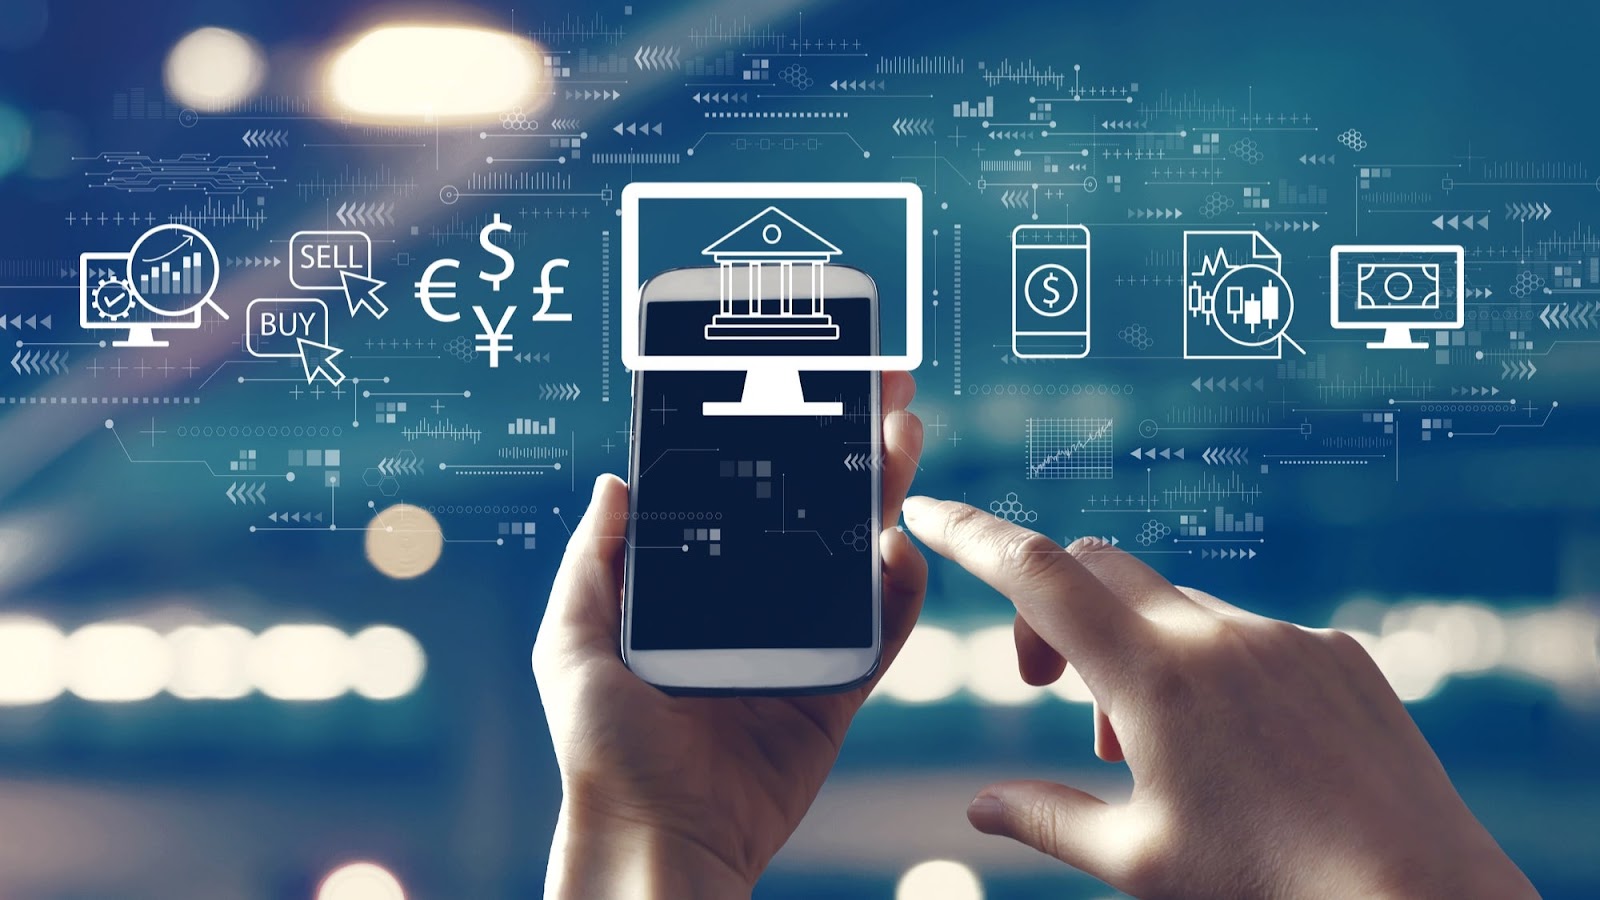 RETAIL BANKING TRENDS YOU WOULDN'T WANT TO MISS